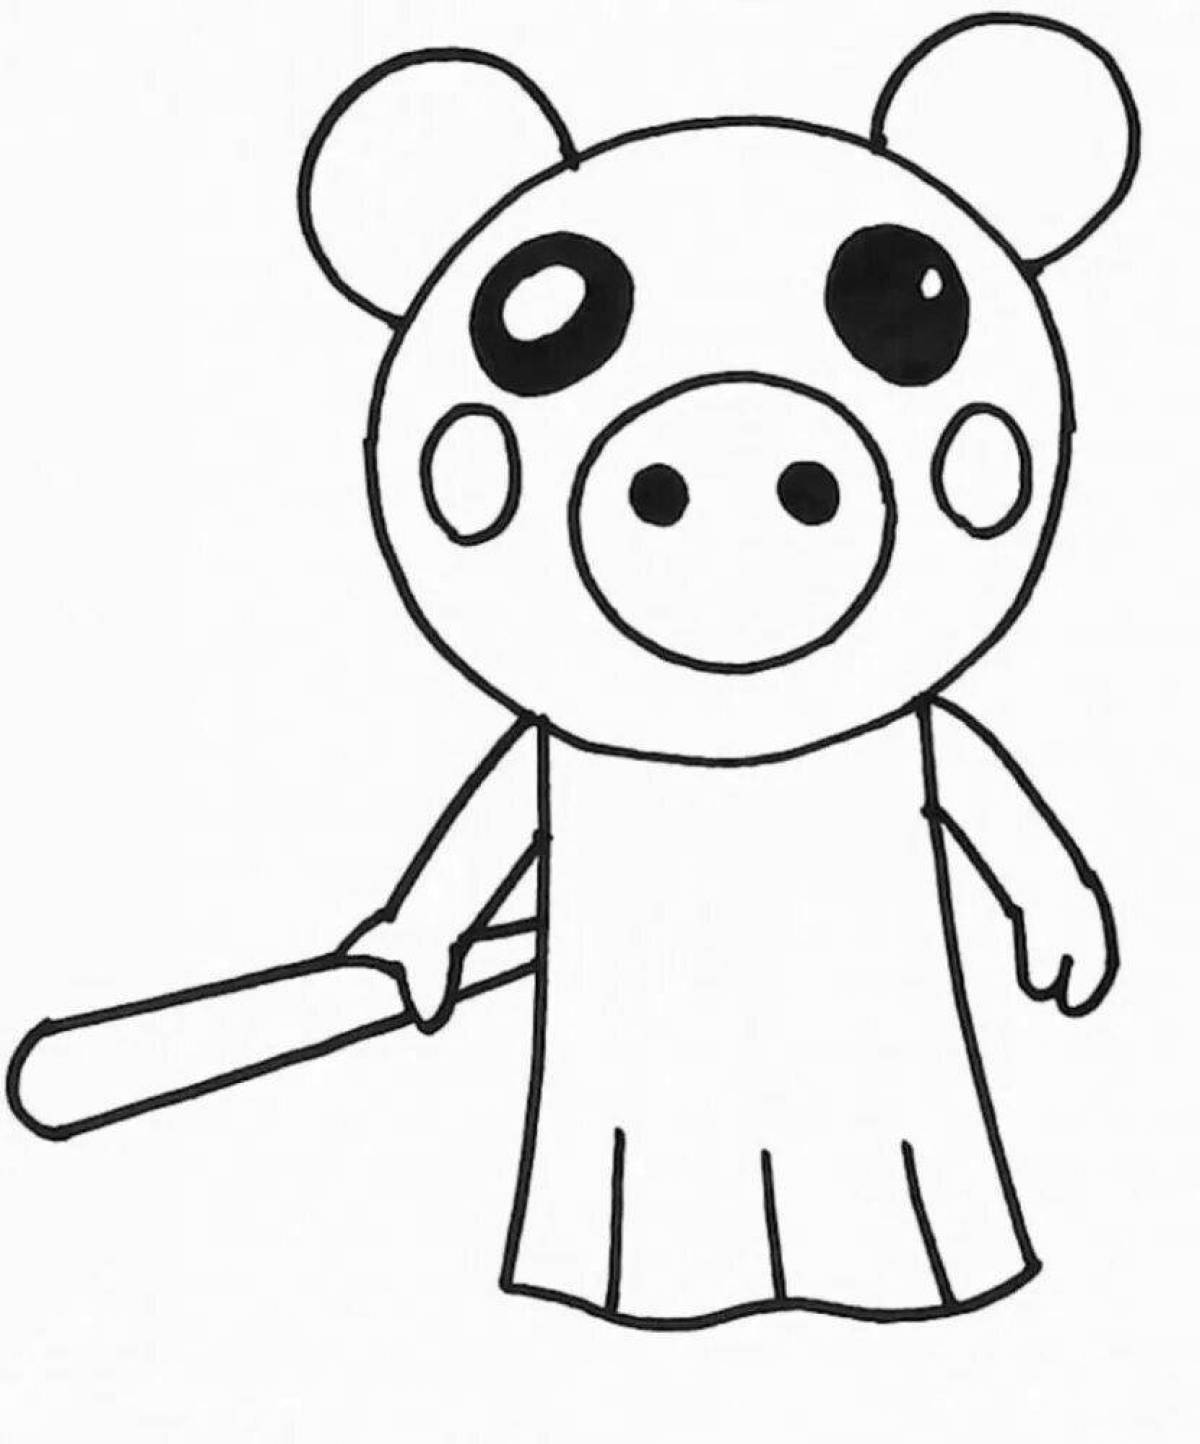 Exciting roblox piggy coloring page